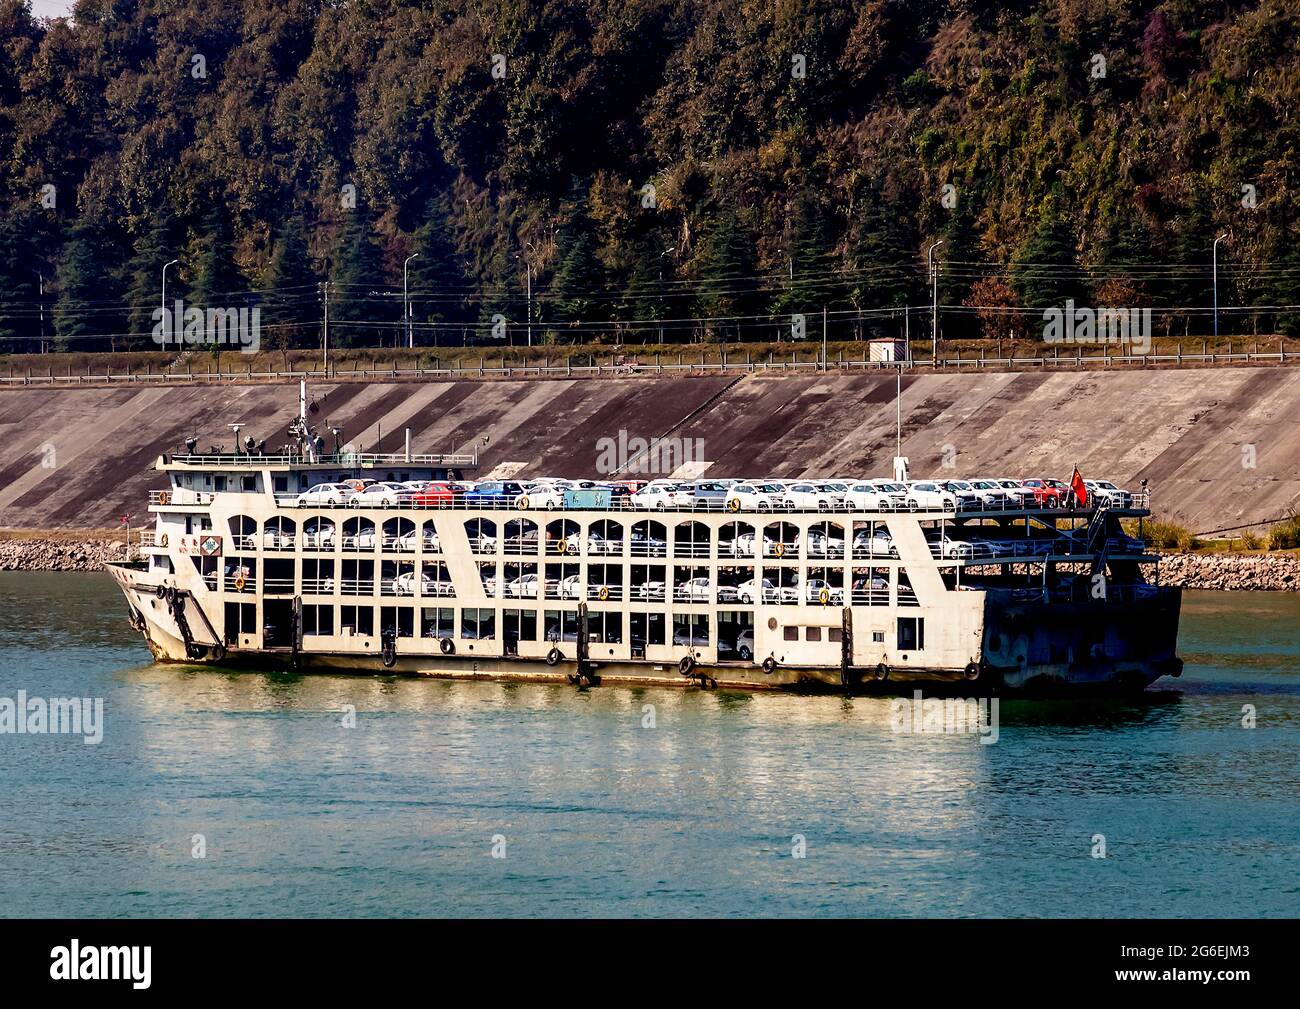 More than 500 new cars being transported along Yangtze River in China Stock Photo